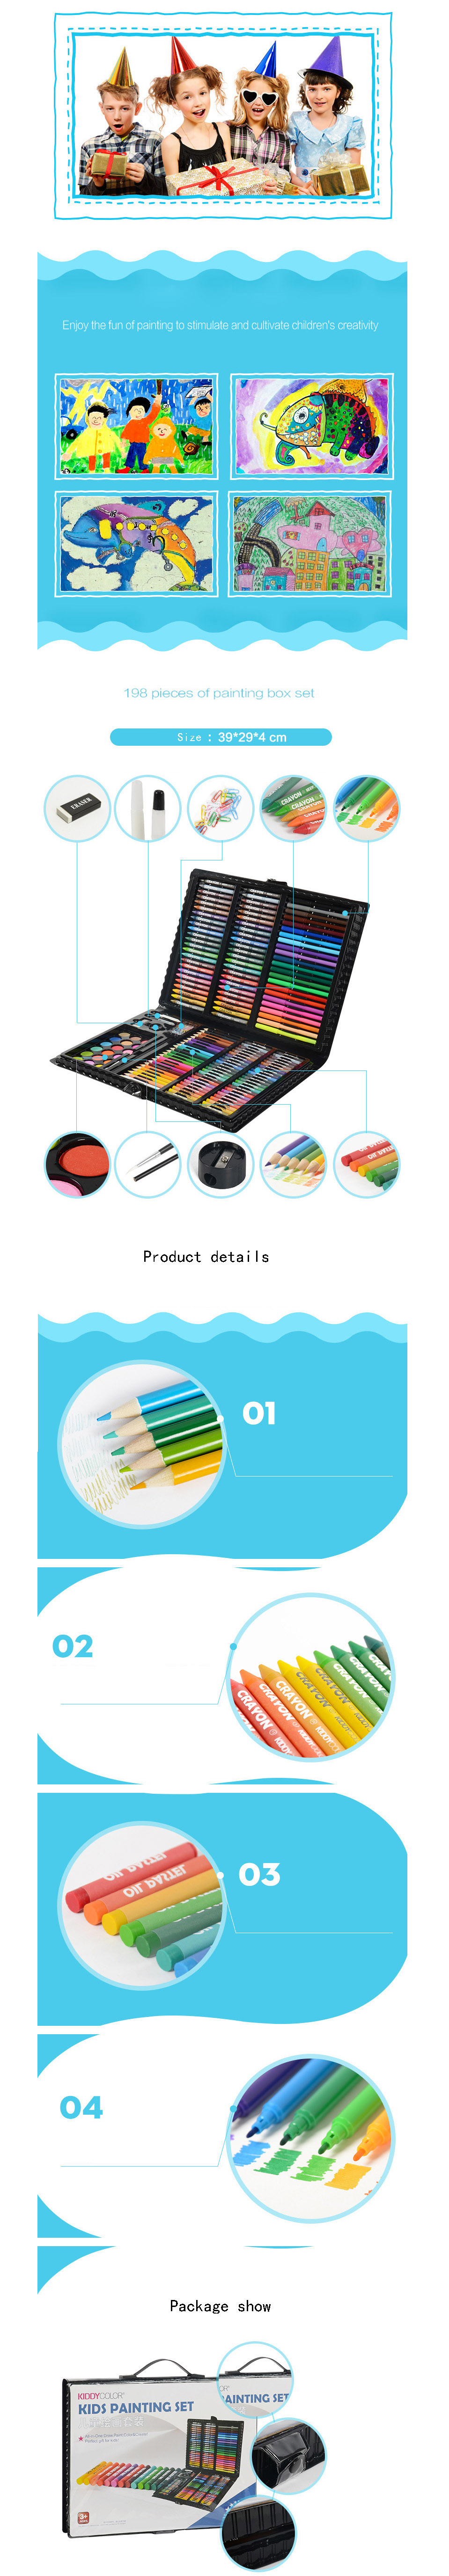 KIDDYCOLOR-Childrens-198-Childrens-Watercolor-Paint-Stationery-Suit-For-School-1460527-1